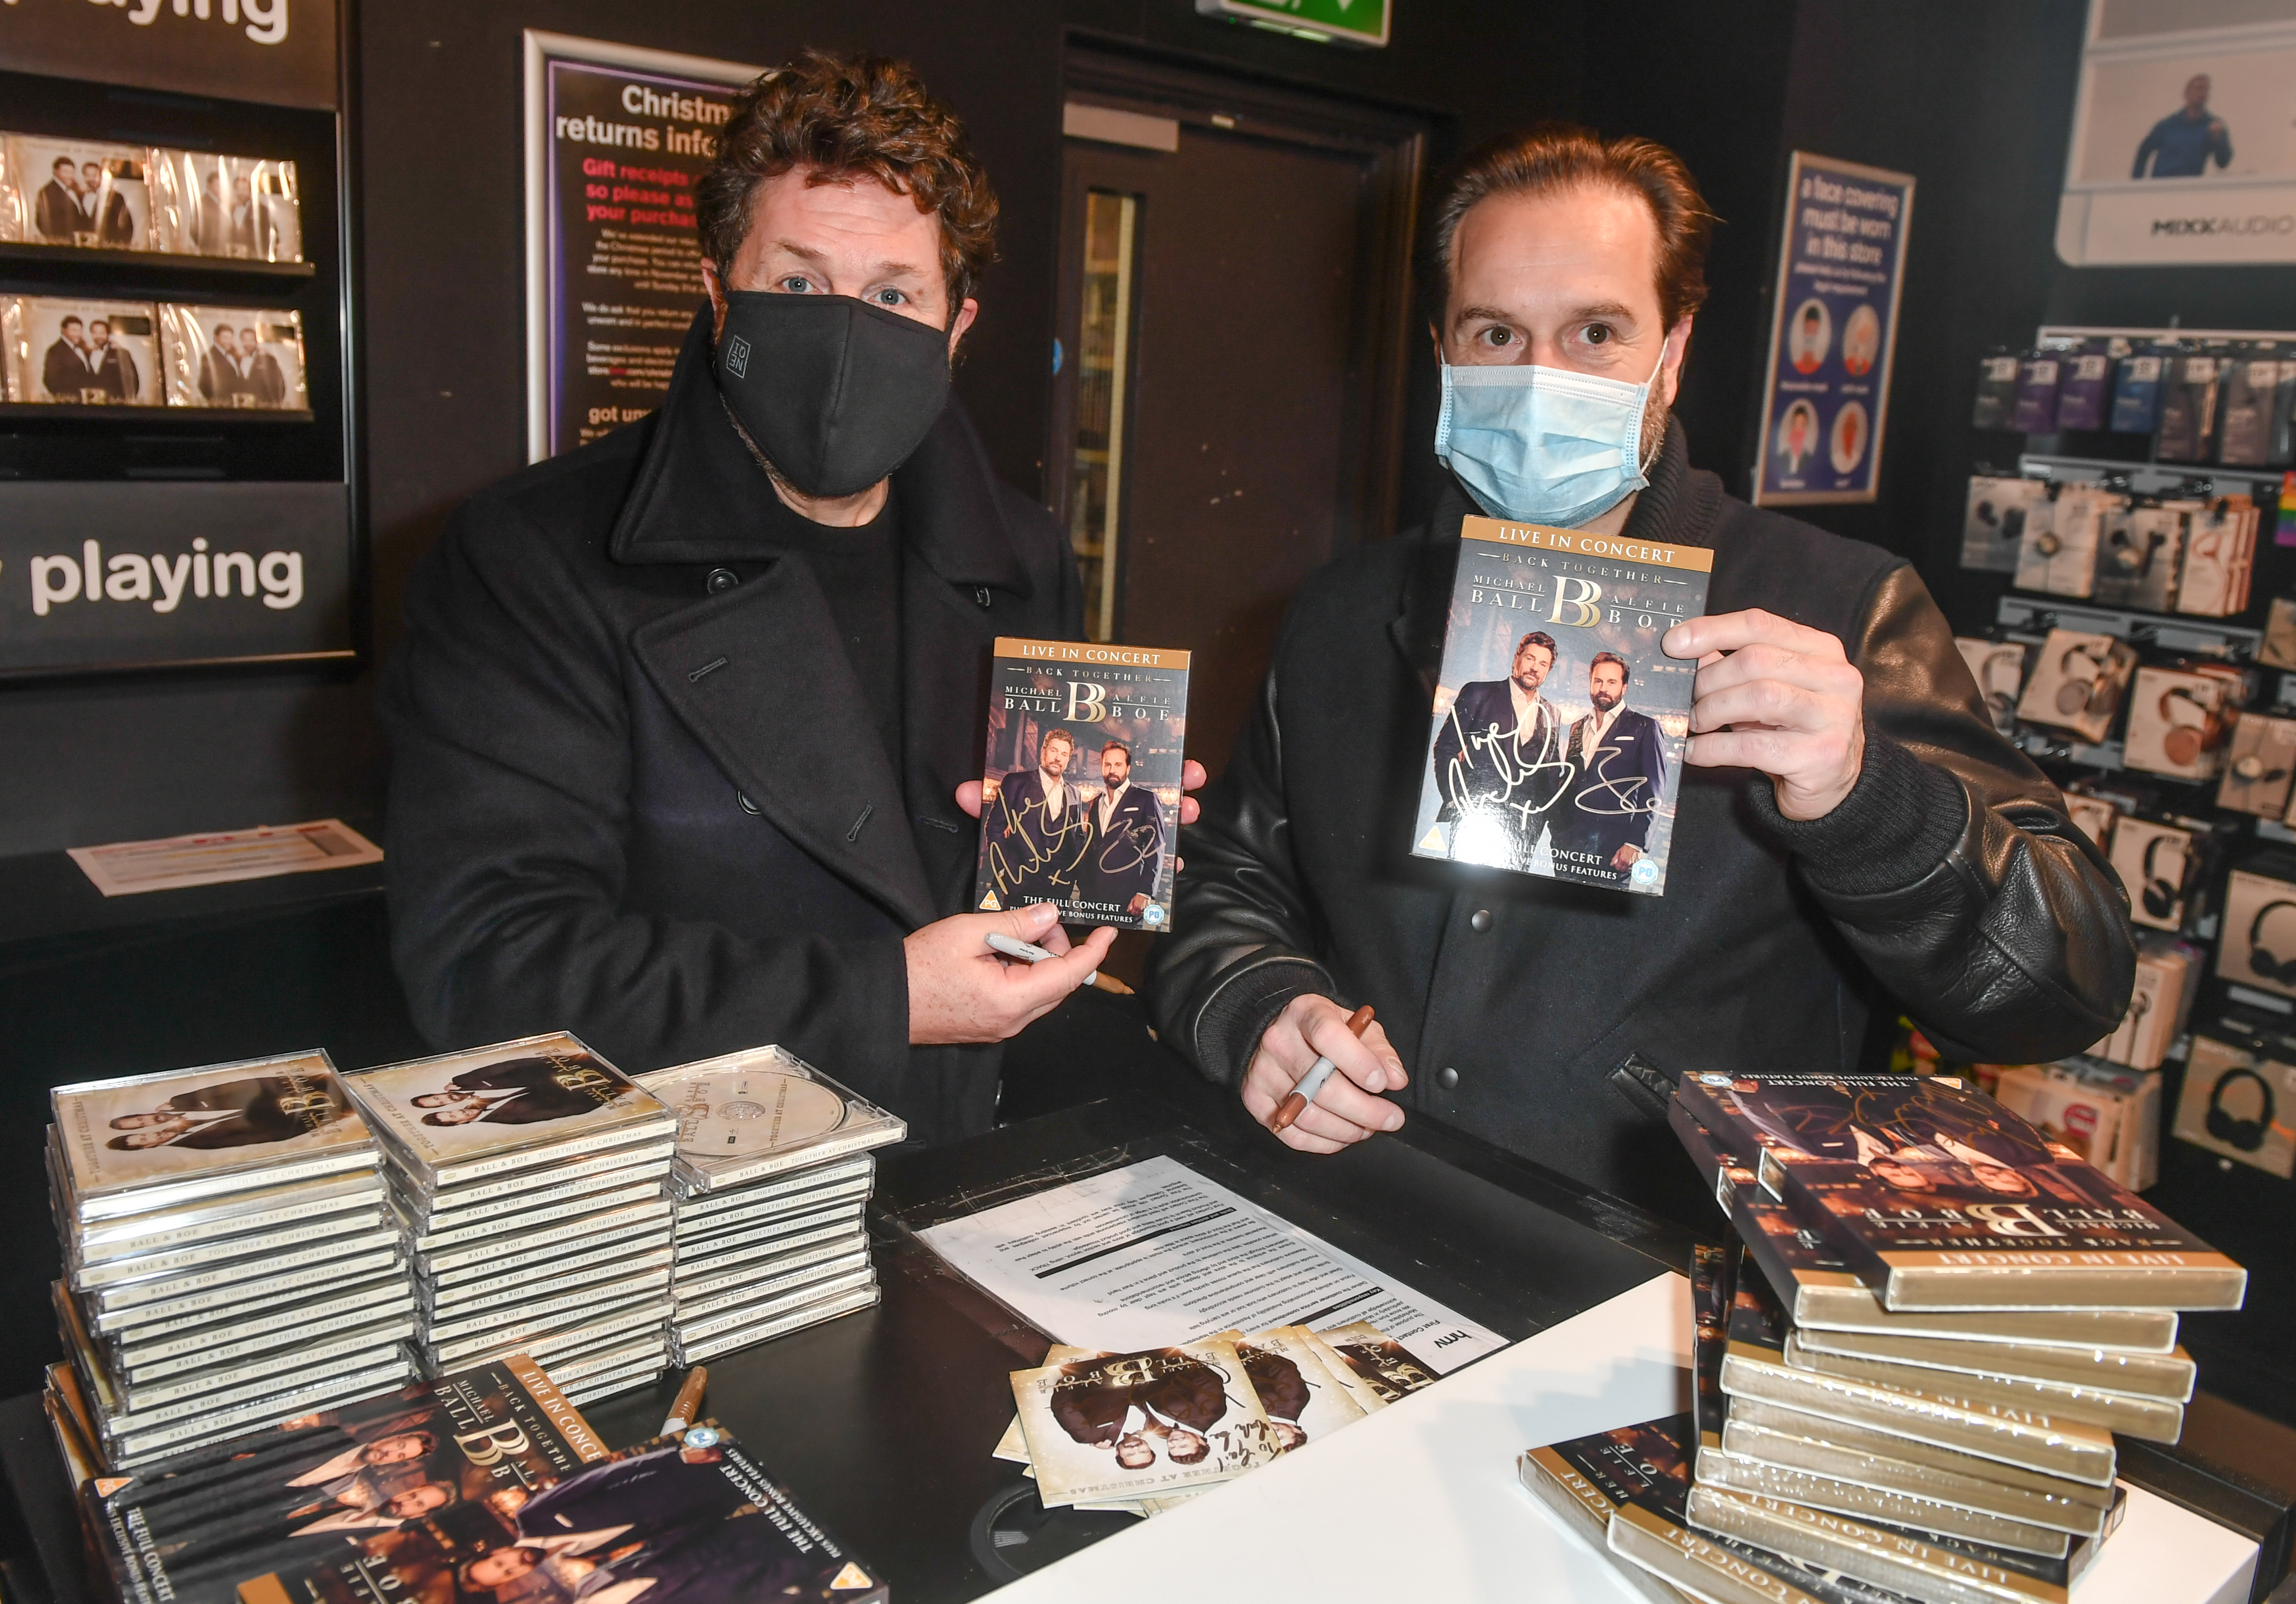 Michael Ball and Alfie Boe signing copies of their new album